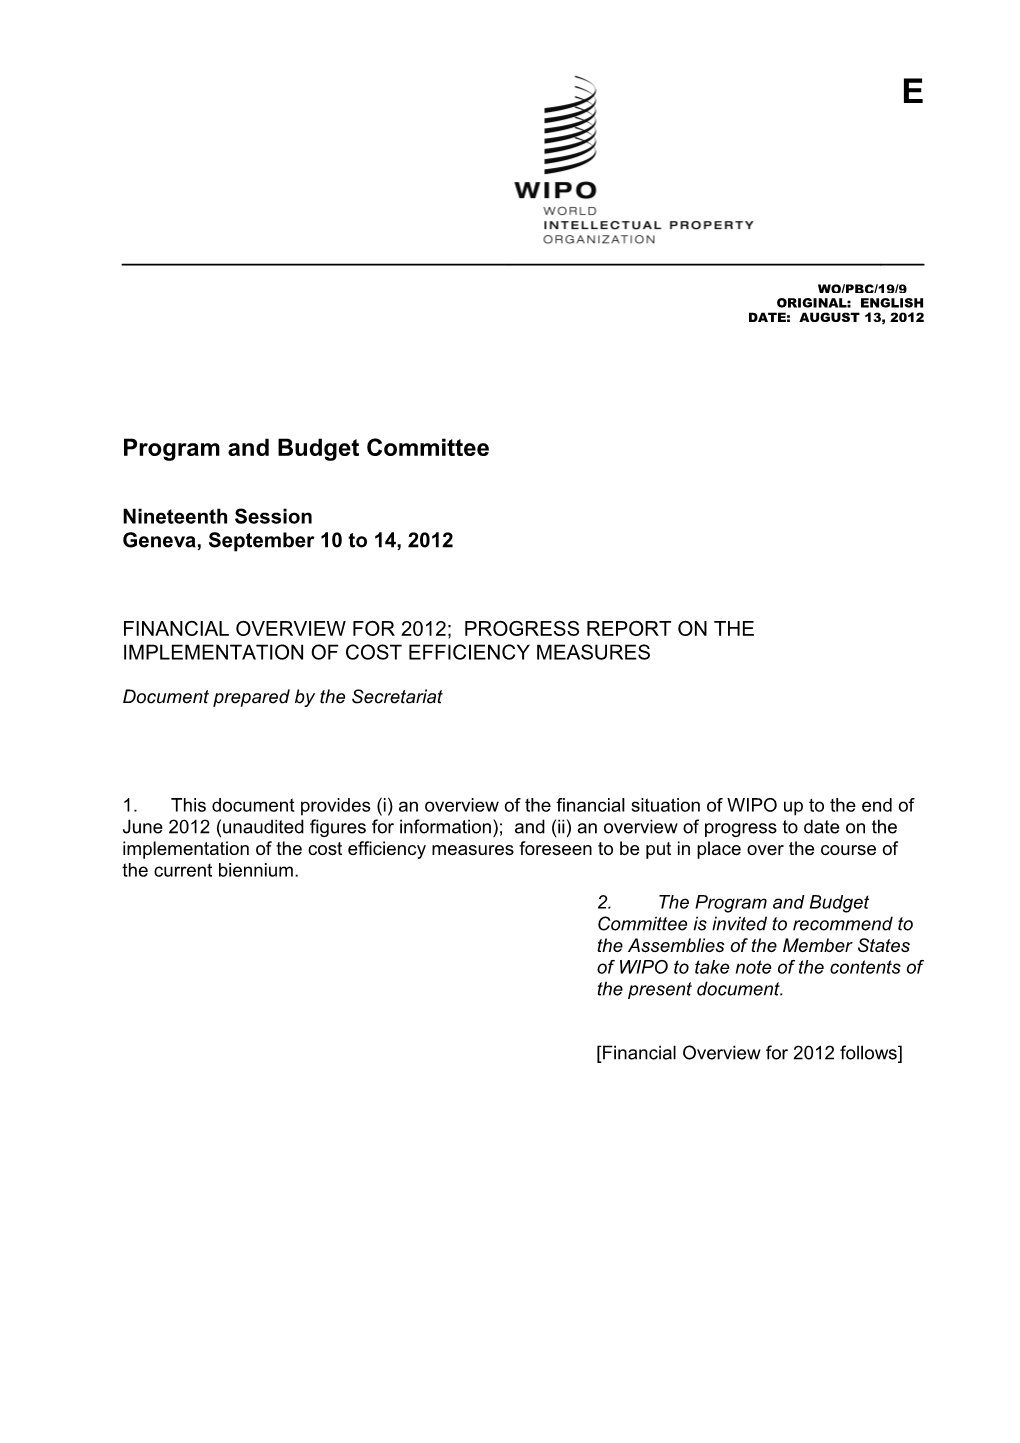 Program and Budget Committee